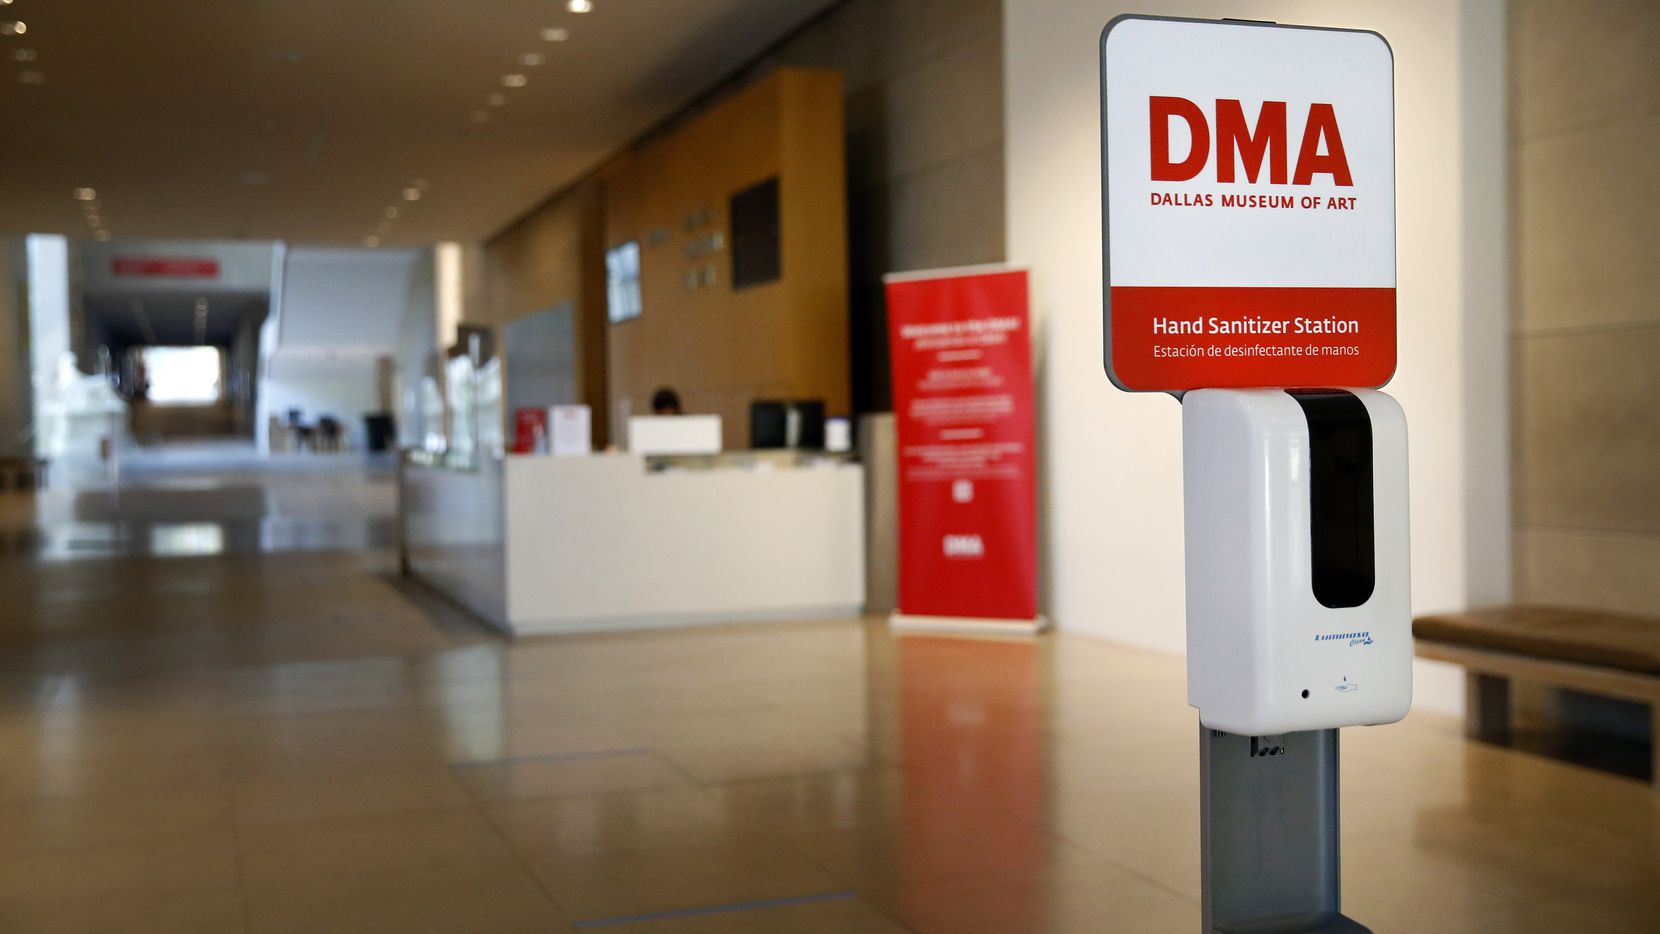 A hand sanitizer station appears at the entrance of The Dallas Museum of Art on Friday, Aug. 7, 2020. The museum is in the process of installing safety features in preparation for its planned reopening on Aug. 14.